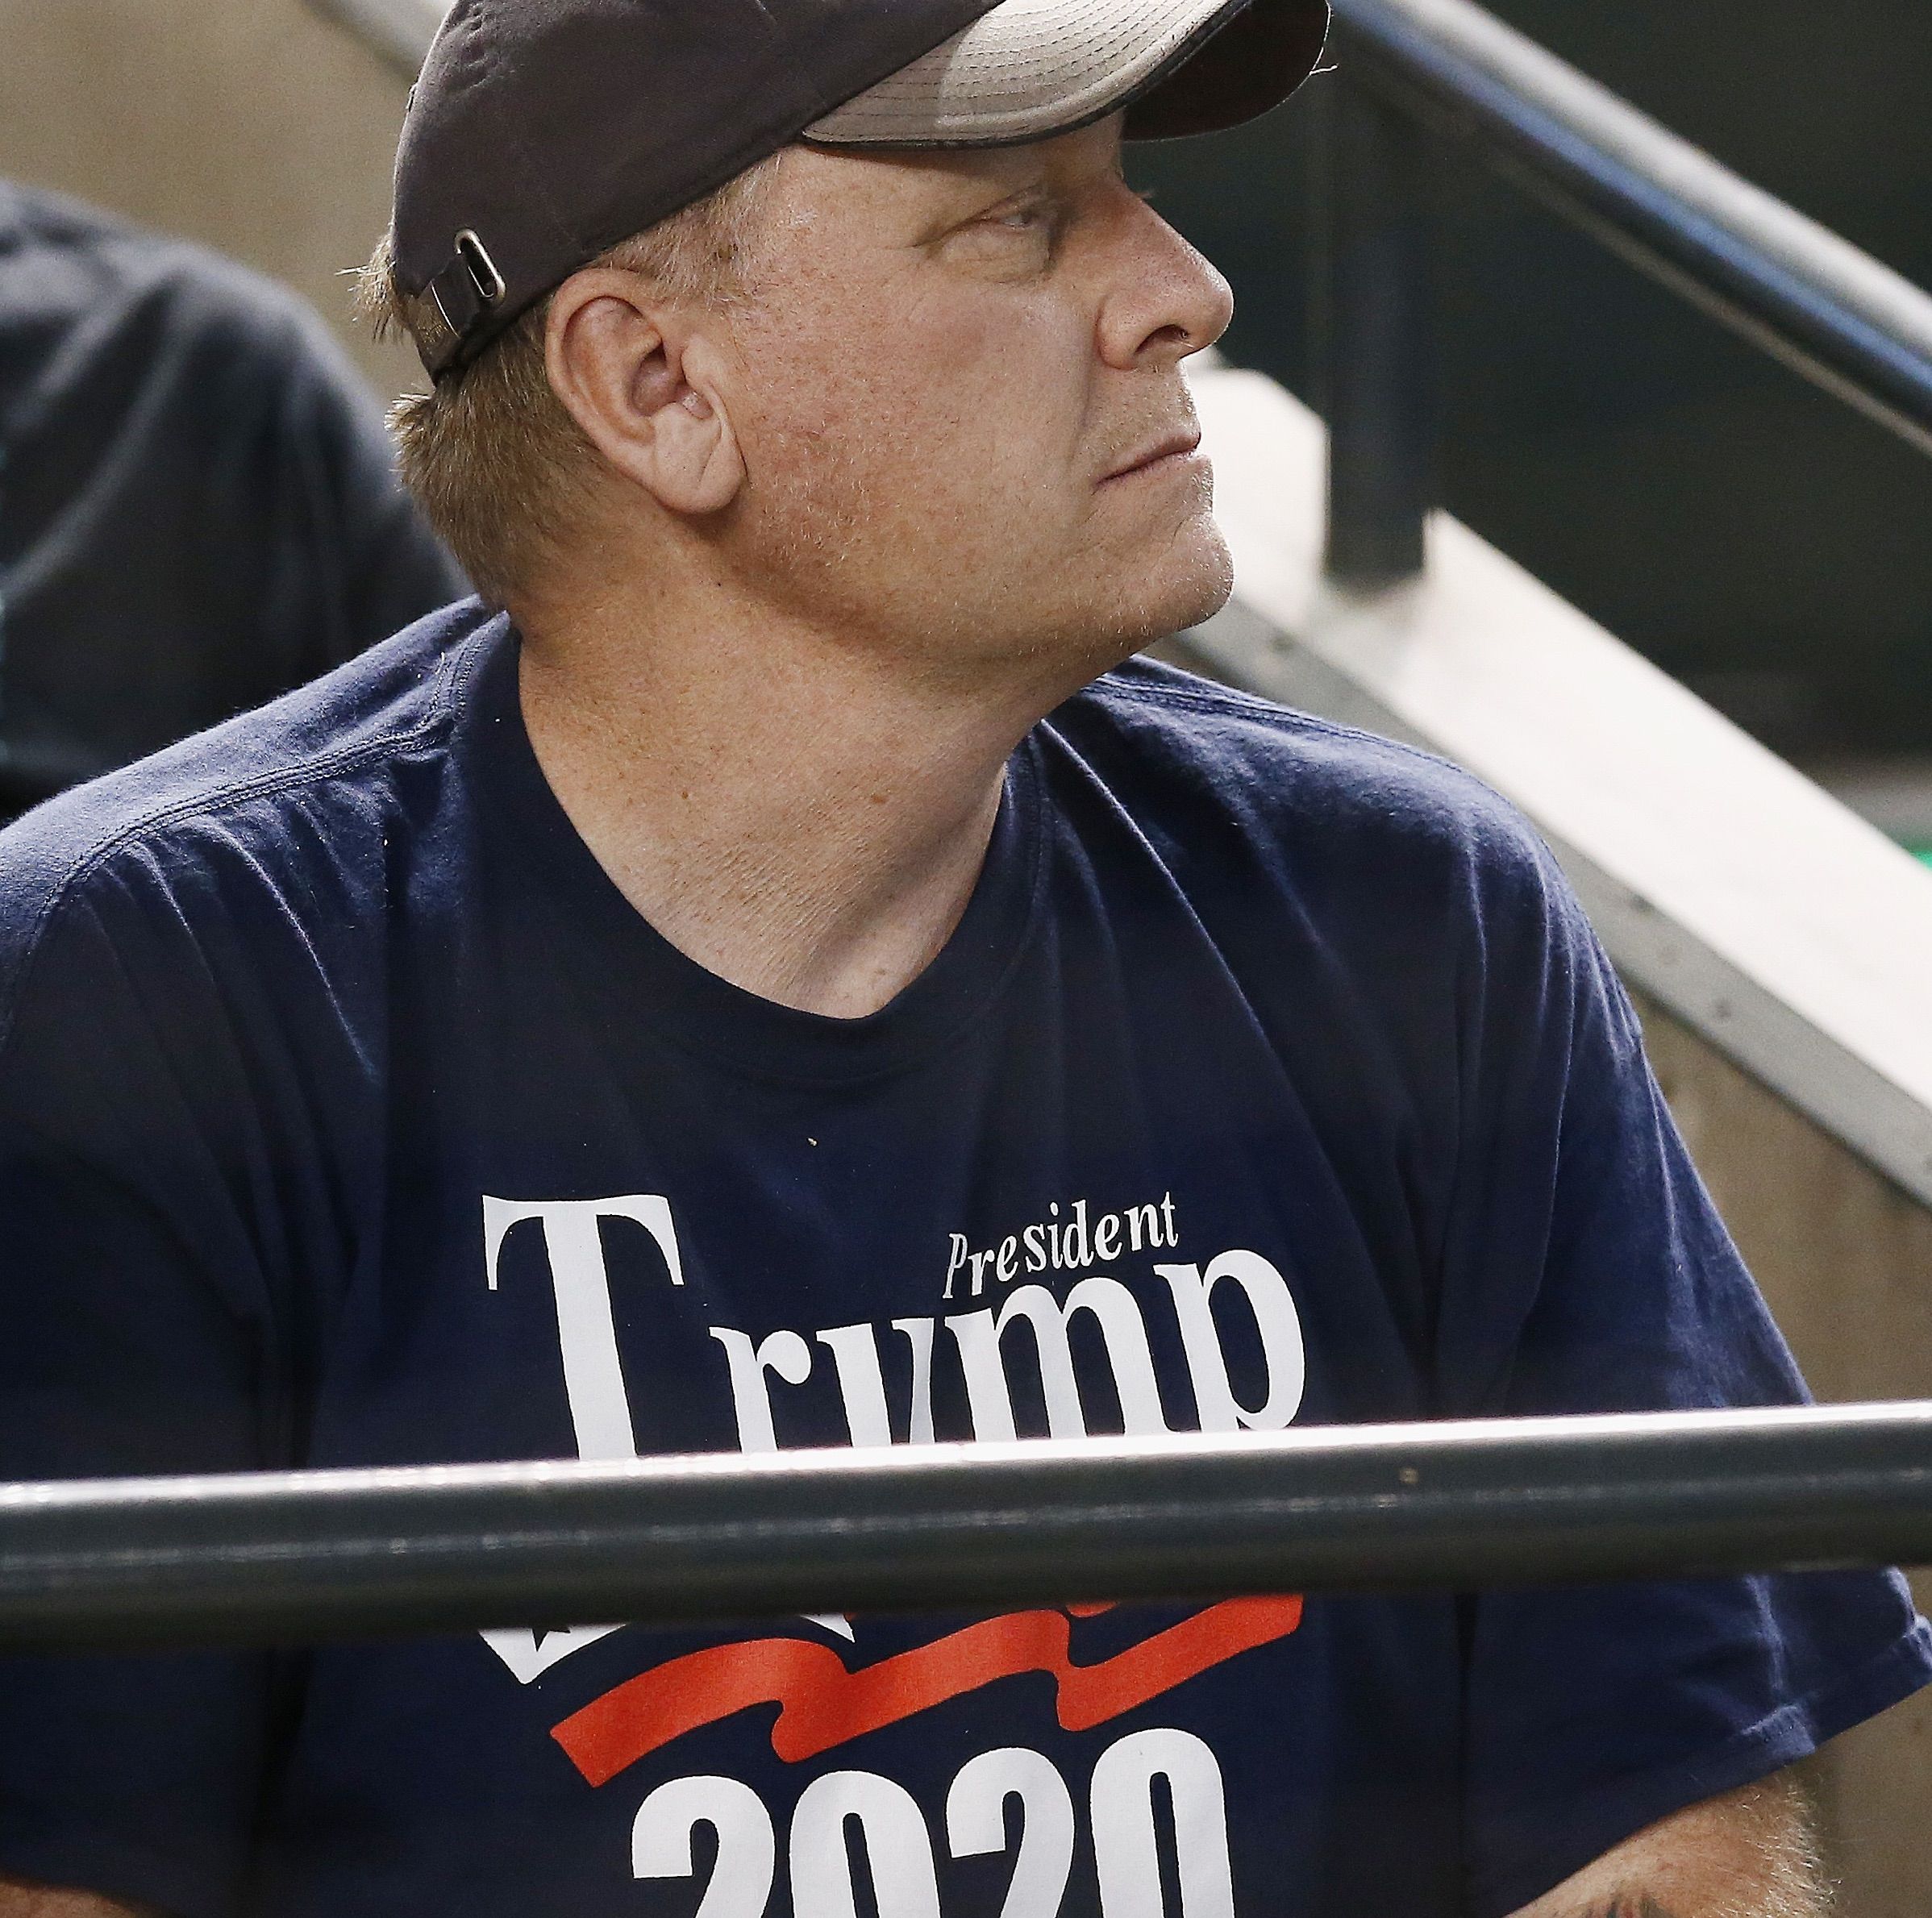 October 19, 2004: Curt Schilling keeps Red Sox alive in 'Bloody